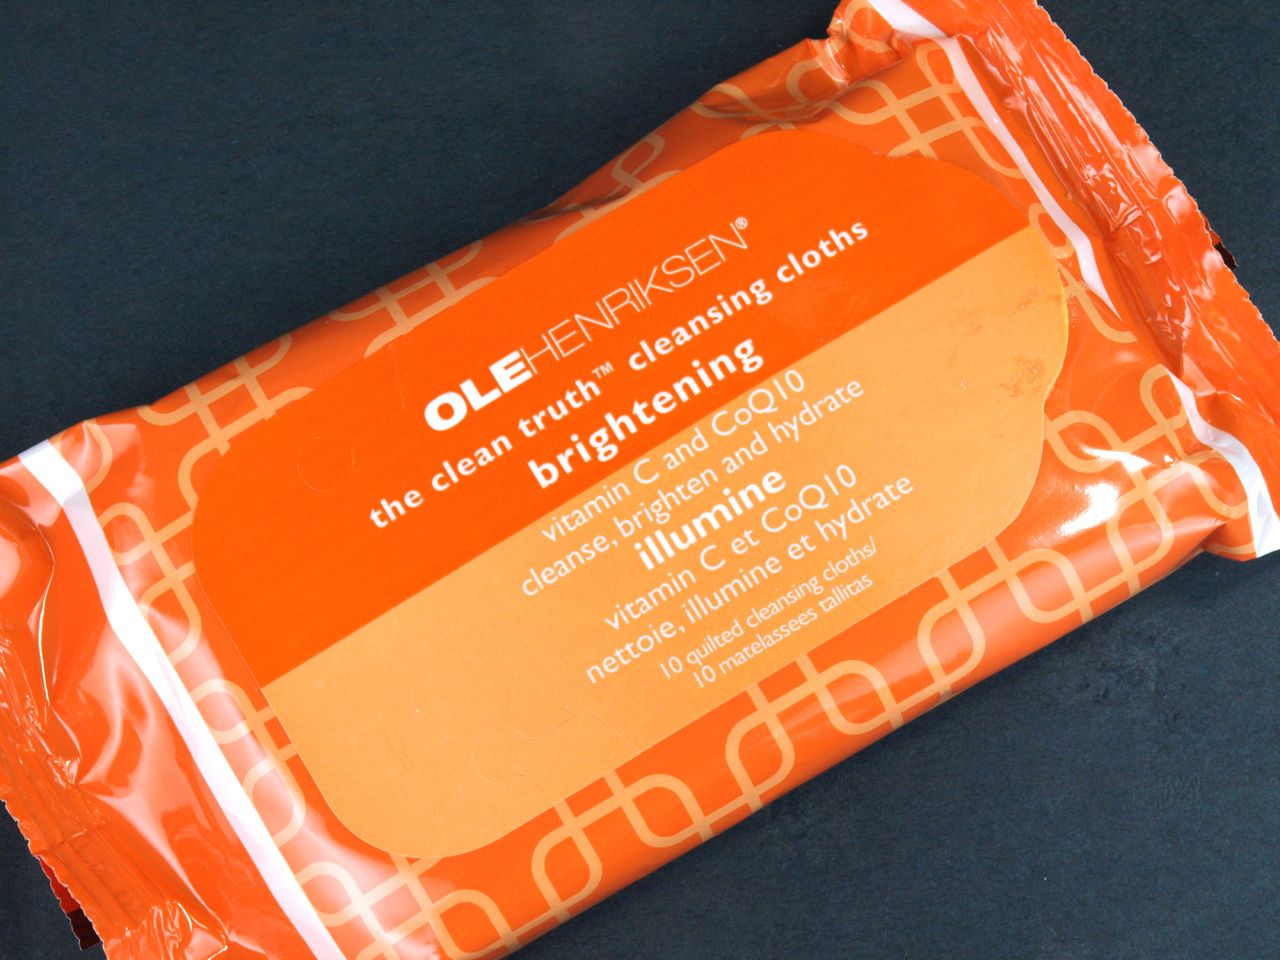 Ole Henriksen Unwrap Your Radiance Gift Set: Review